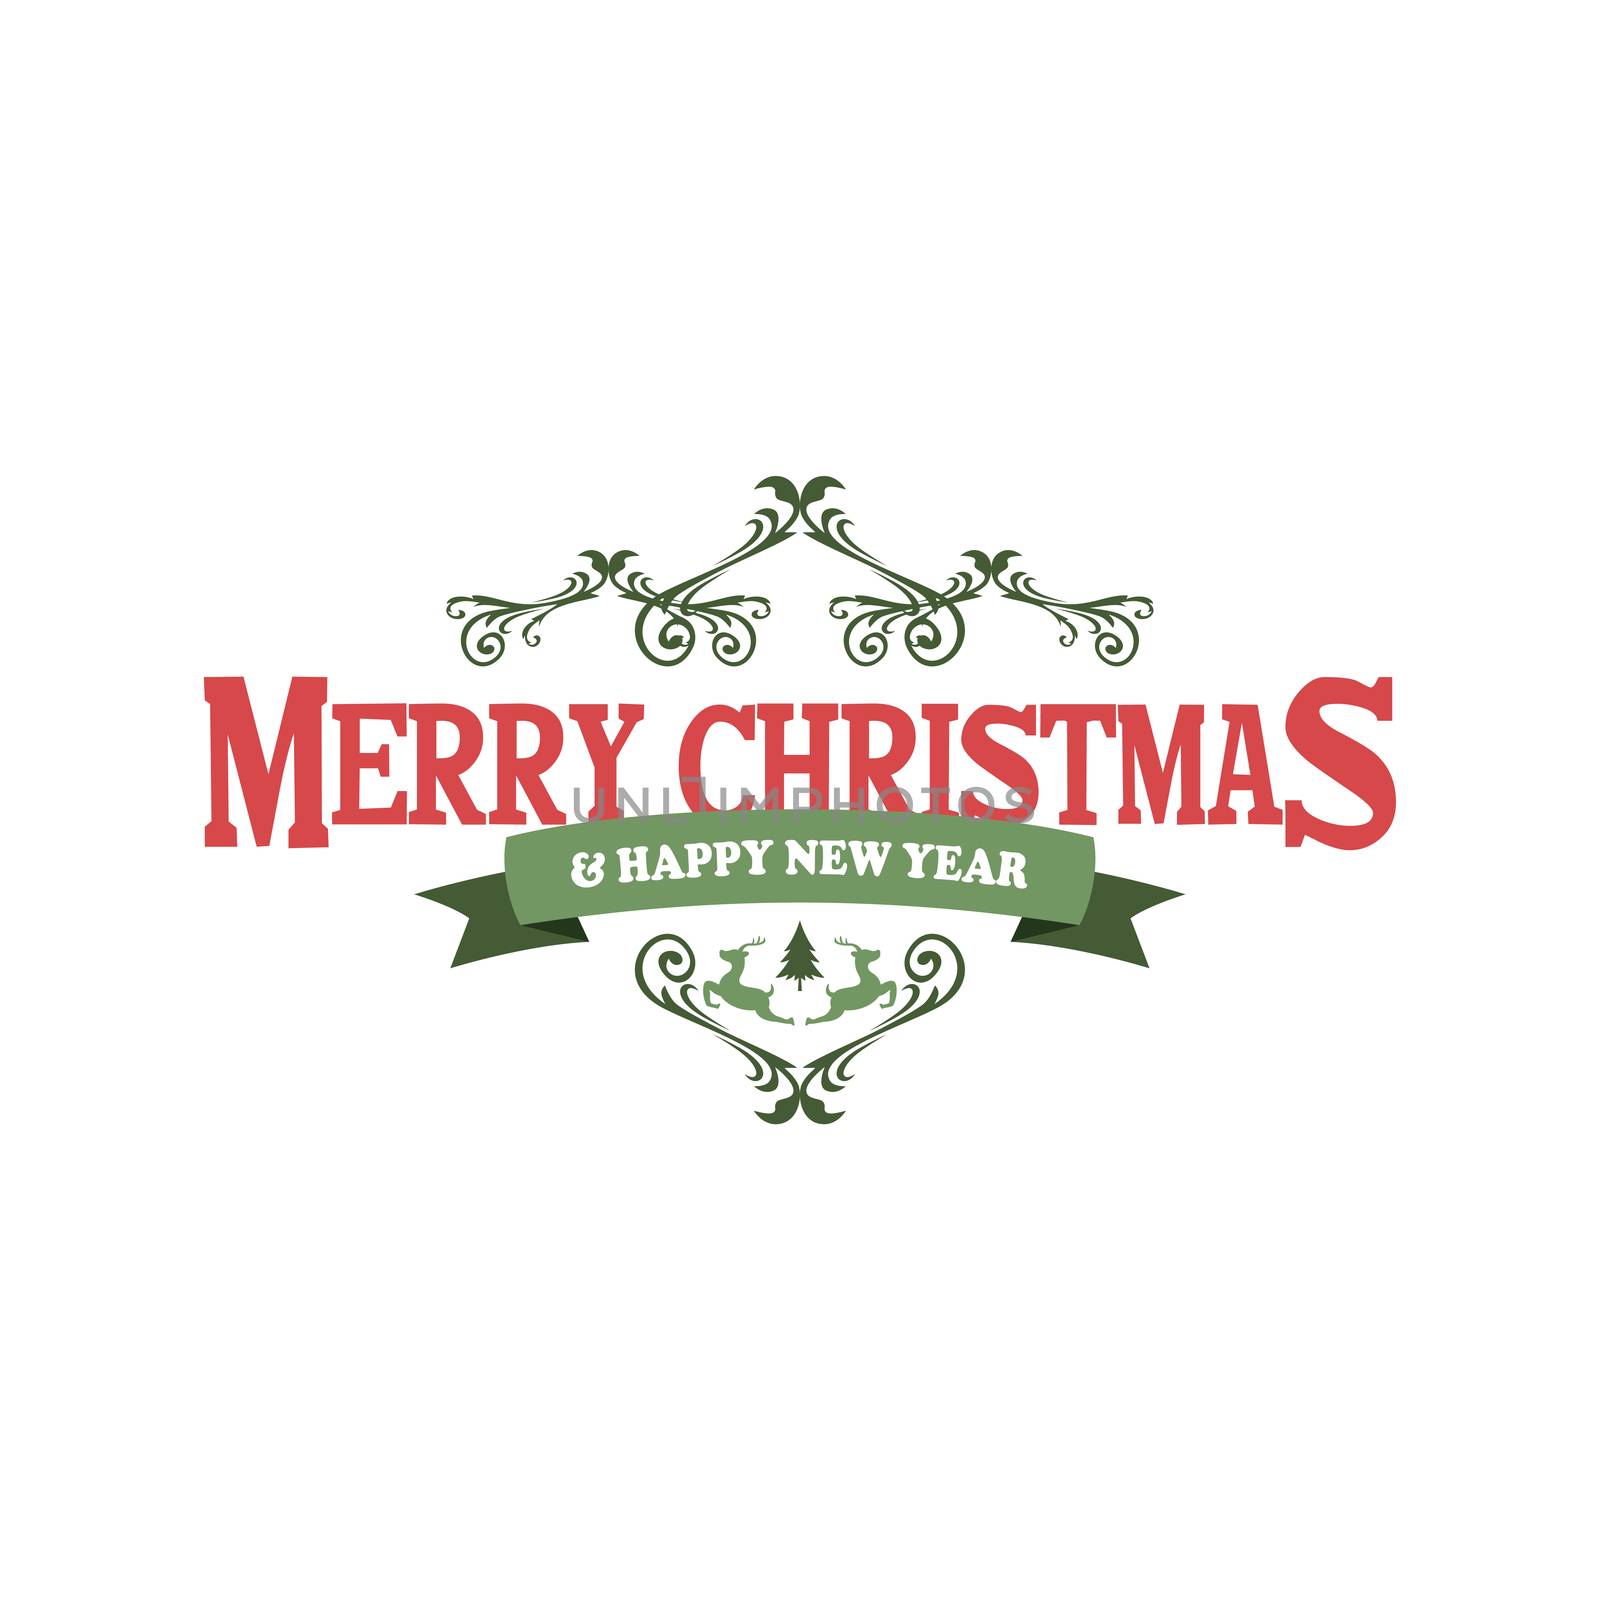 merry christmas label by vector1st